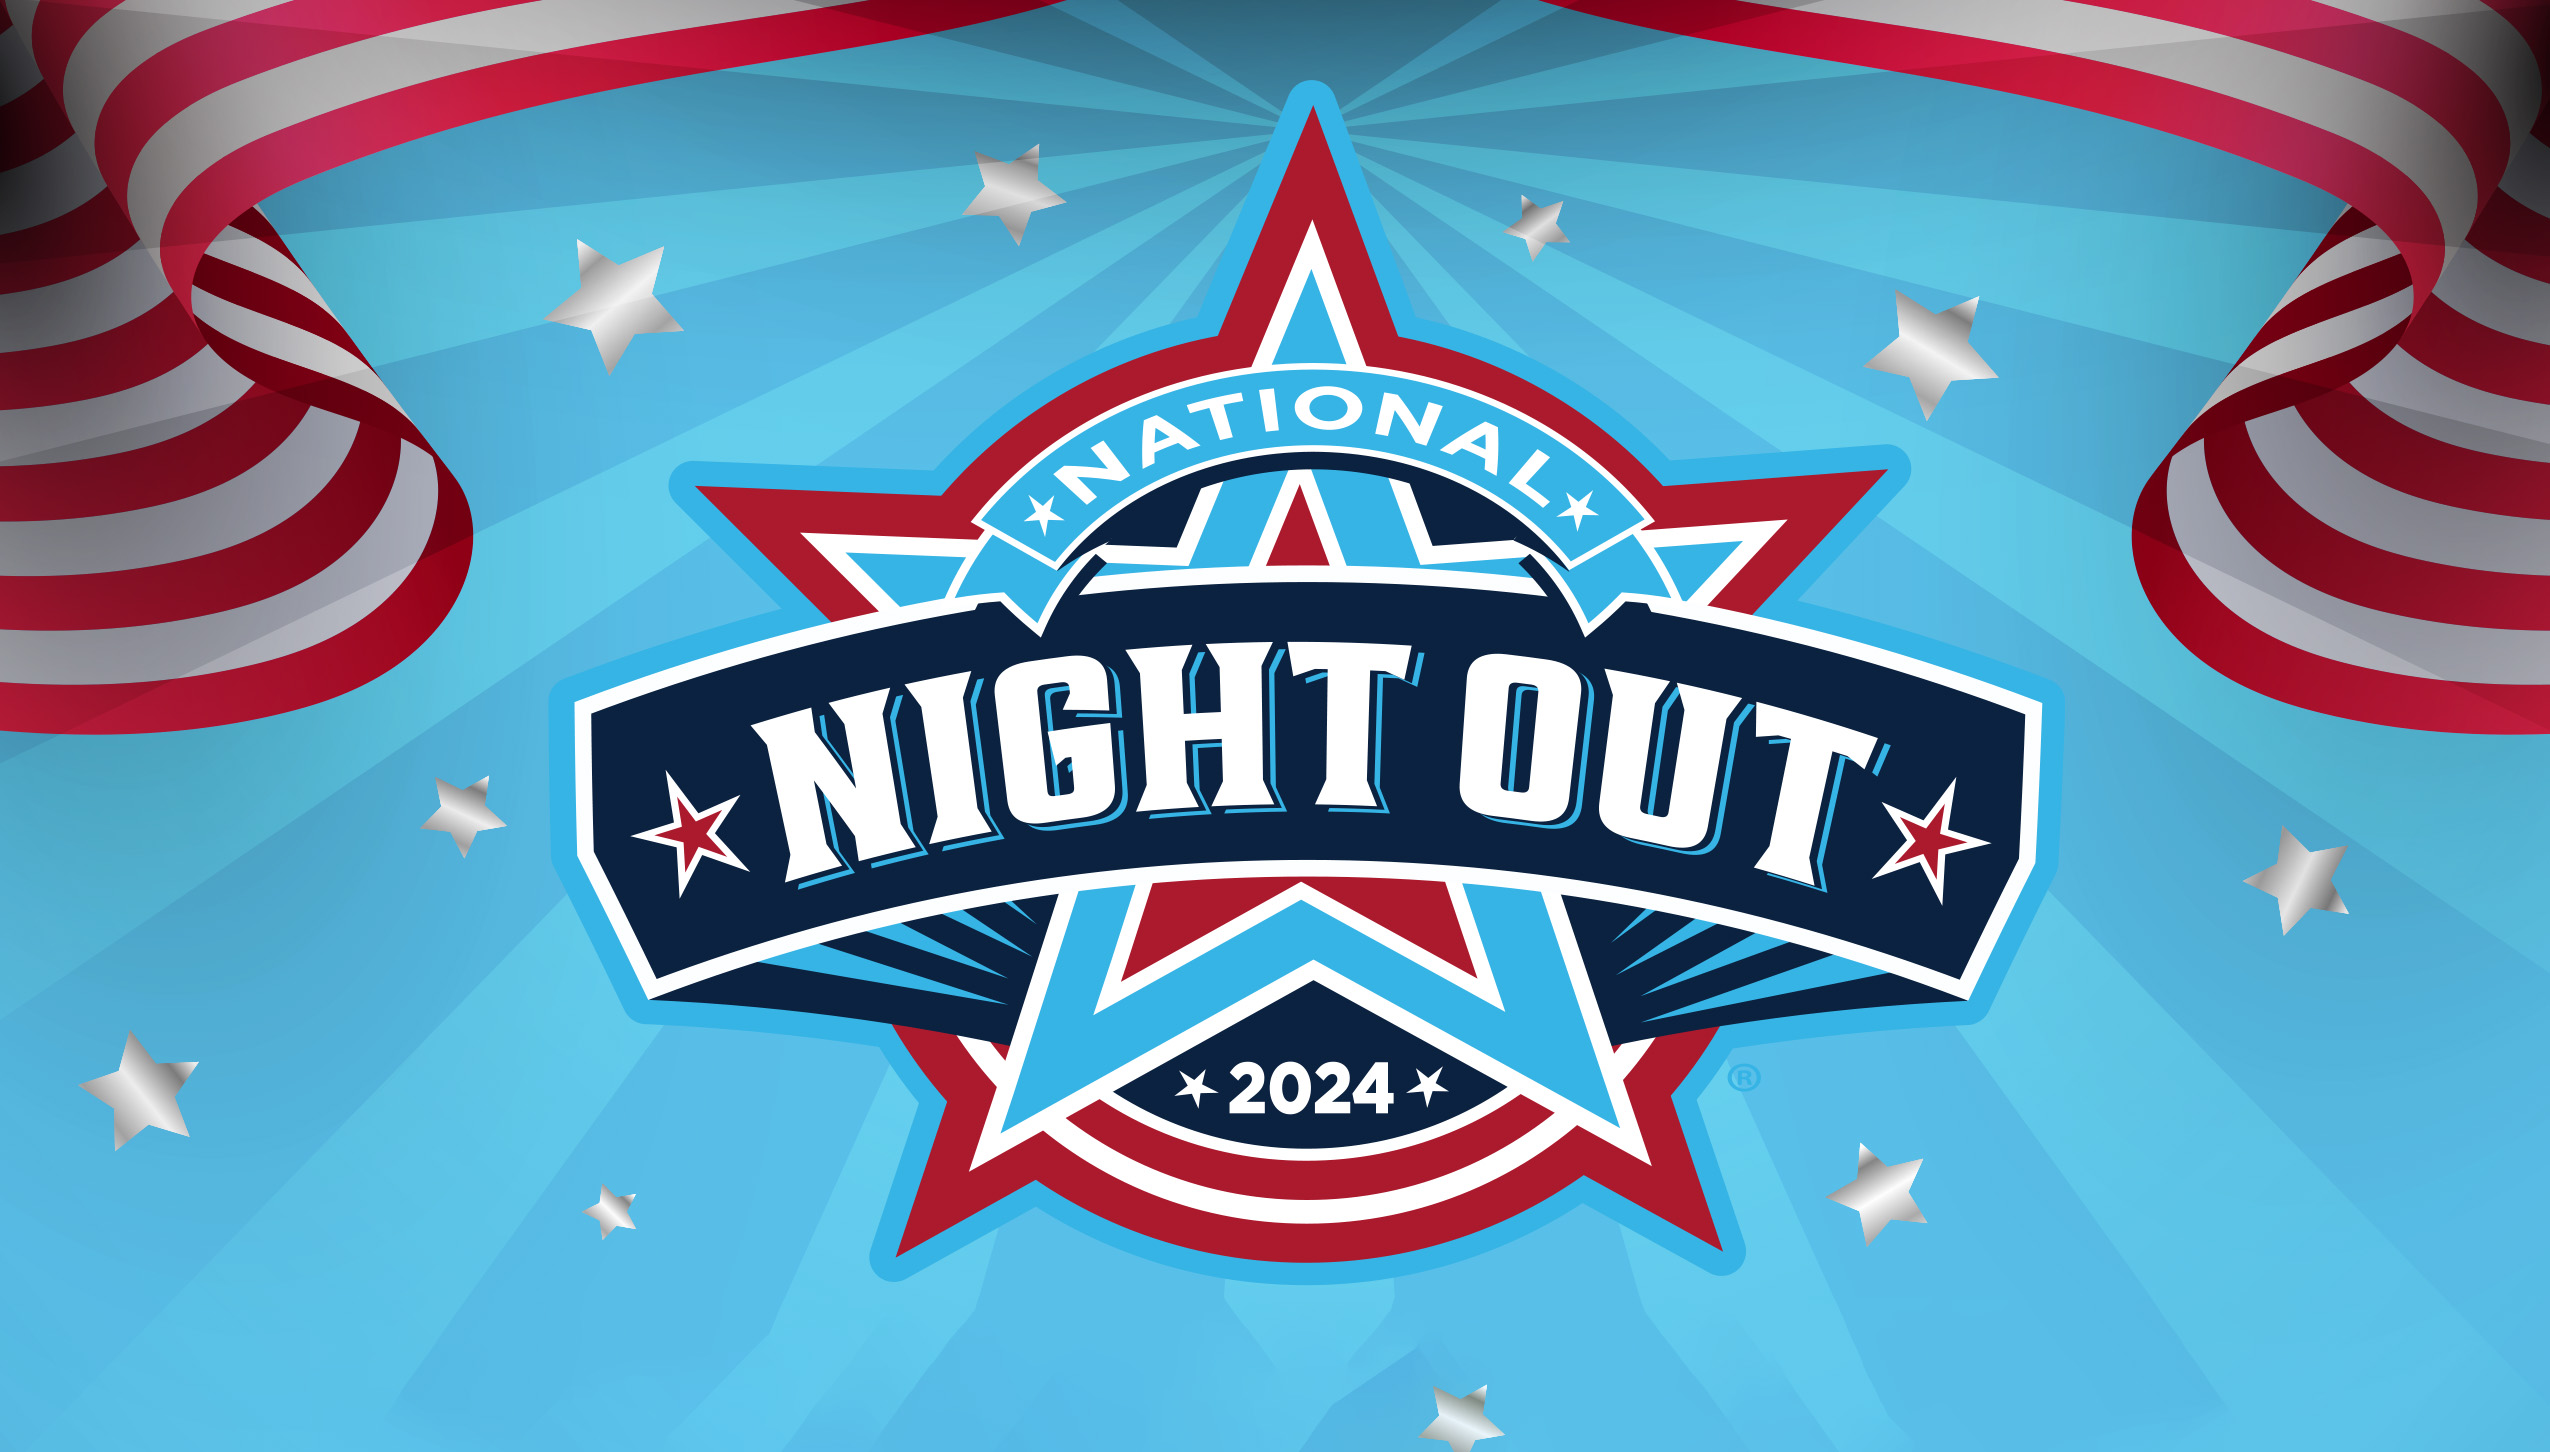 Image of Celebrate National Night Out at Concerts Under the Stars on August 8